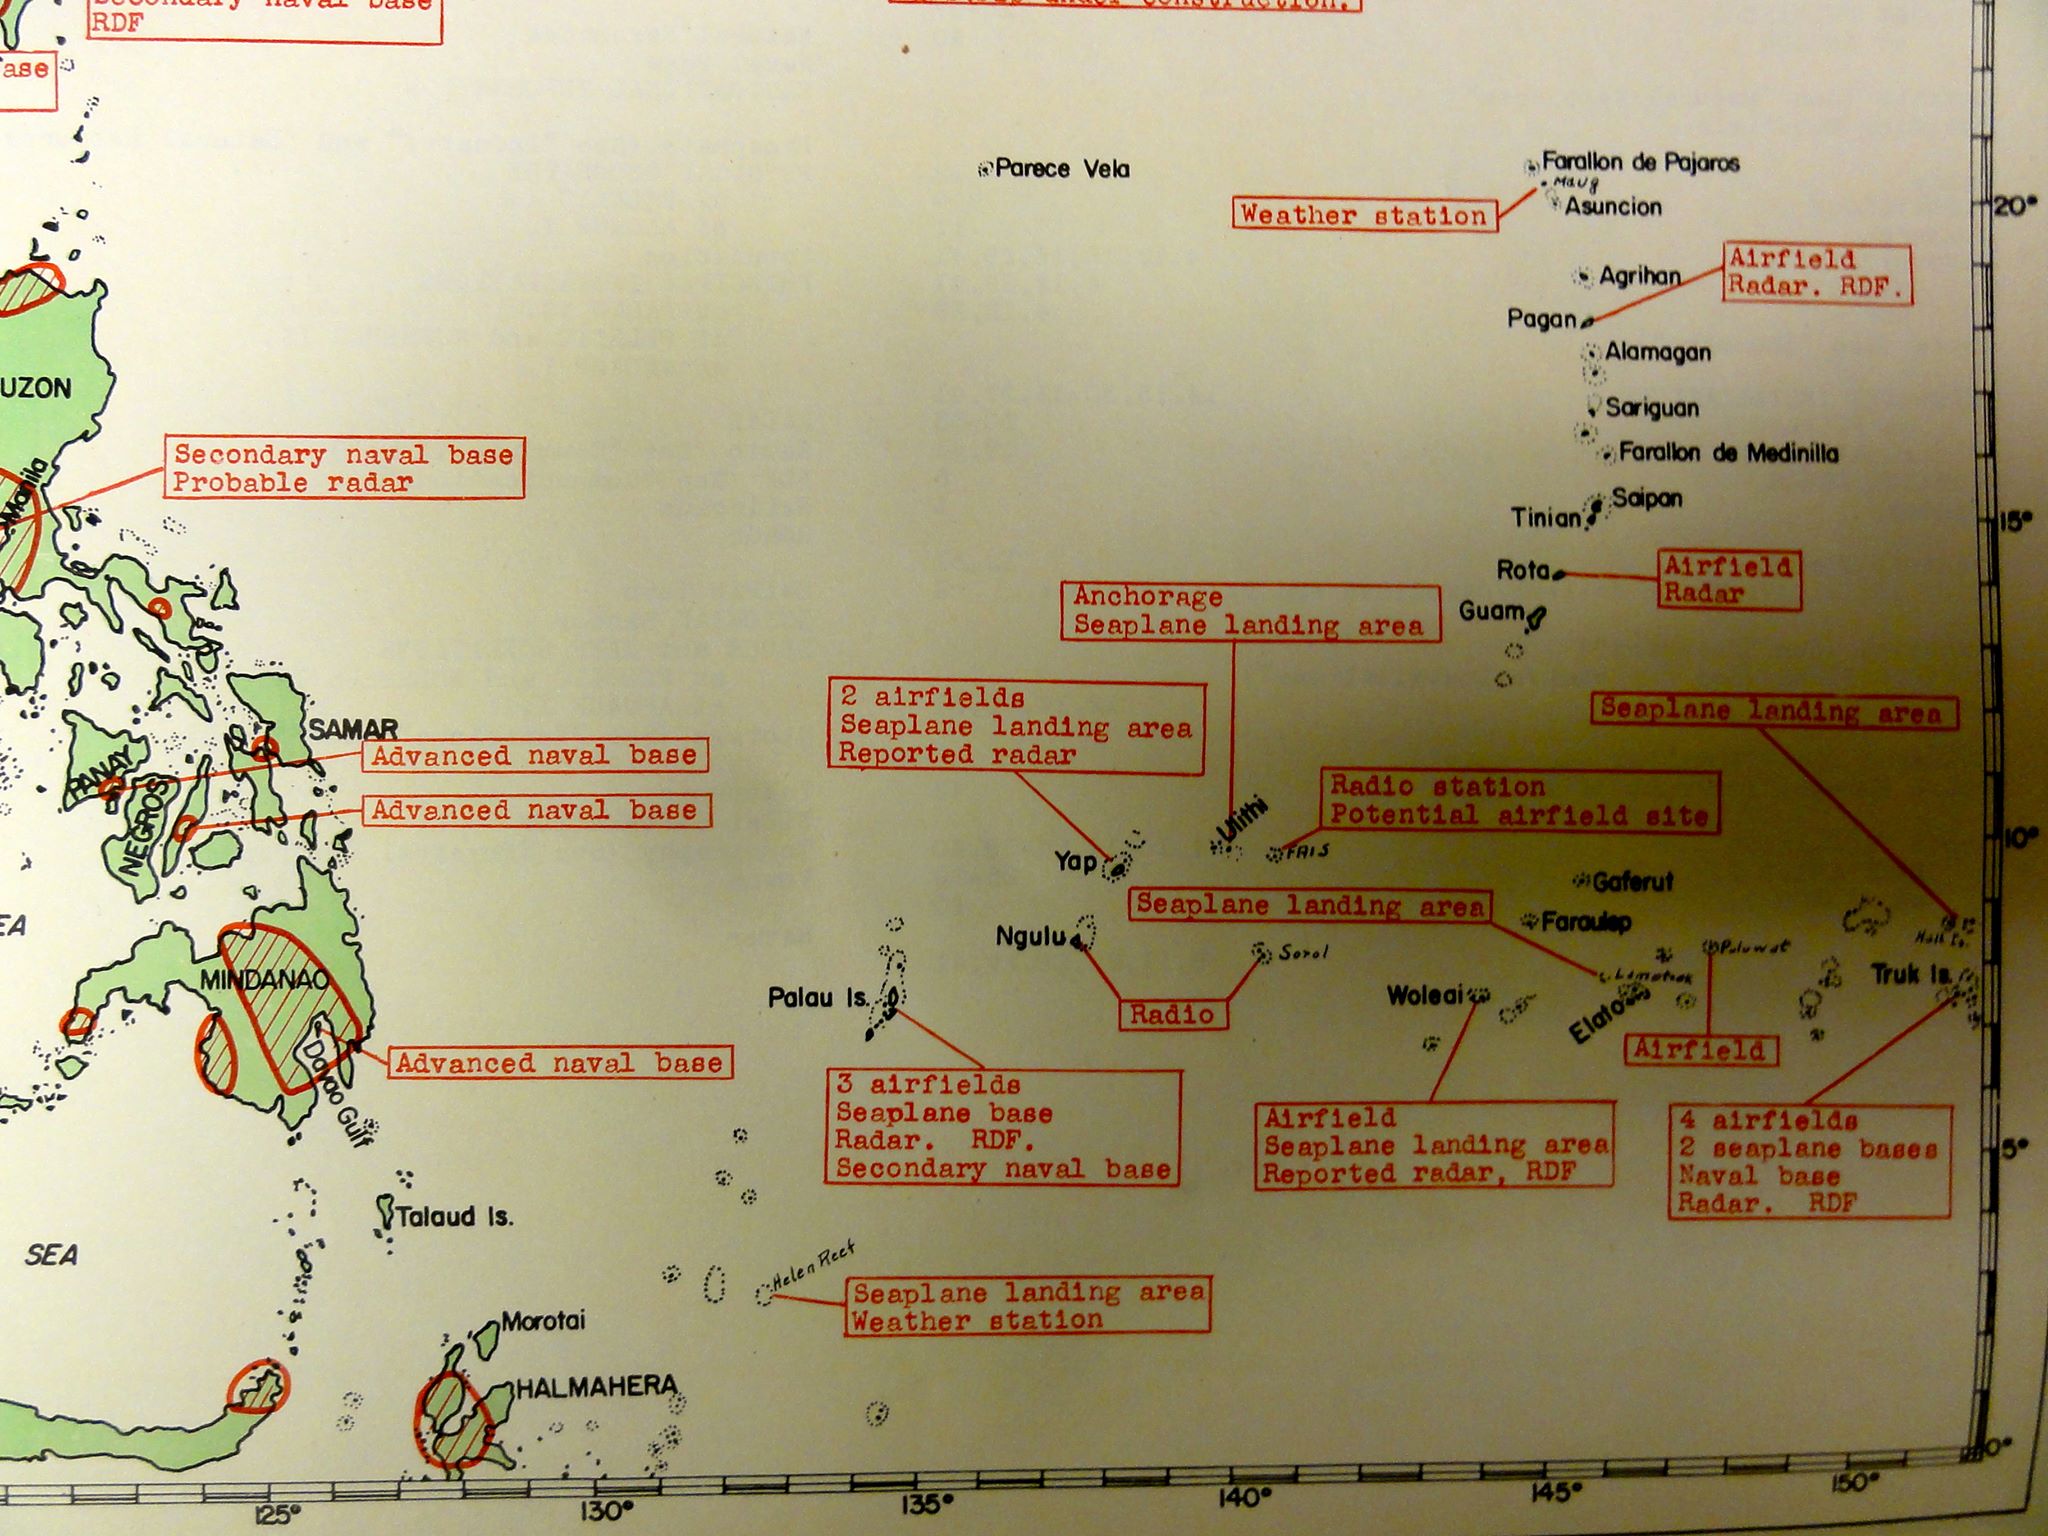 Map showing Japanese positions across the southern Pacific, published in US Pacific Fleet and Pacific Ocean Areas Information Bulletin No. 124-44 of 15 Aug 1944